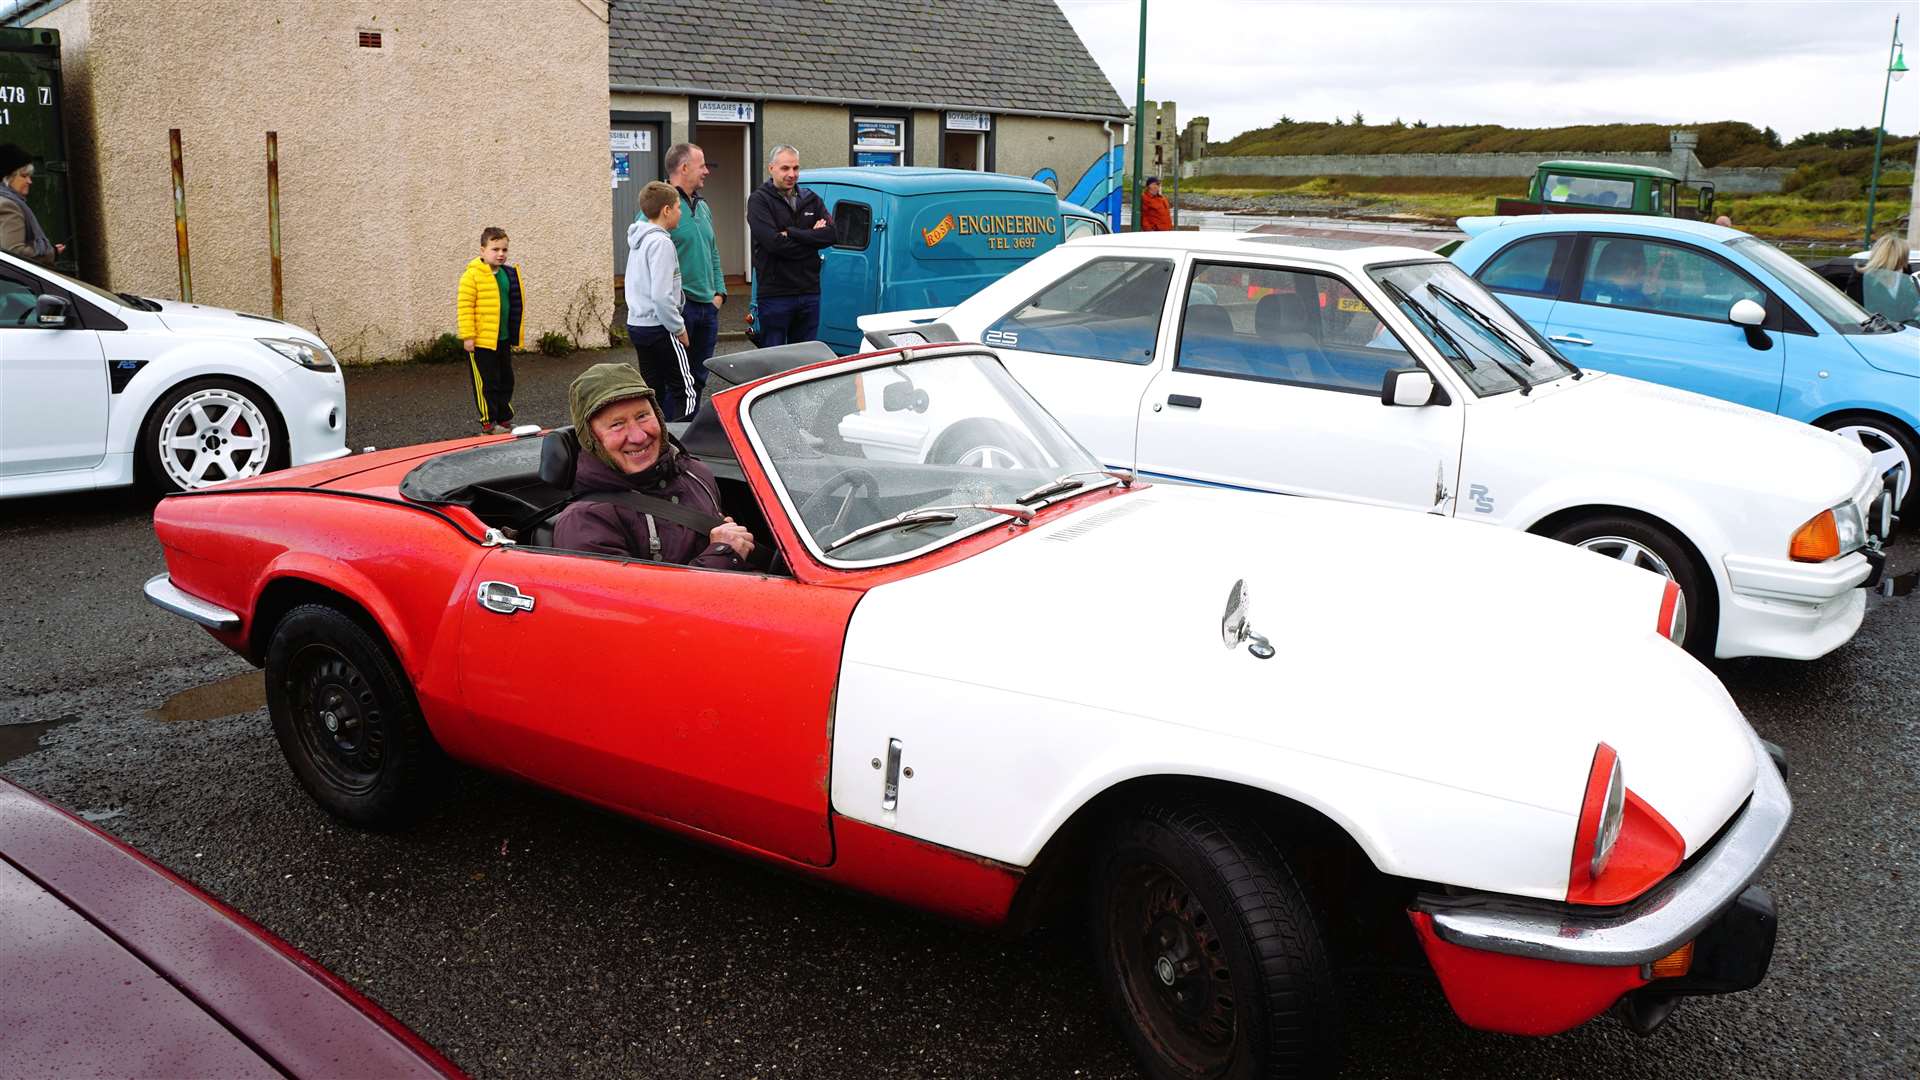 David Broughton gets ready to set off in his Triumph Spitfire. Picture: DGS